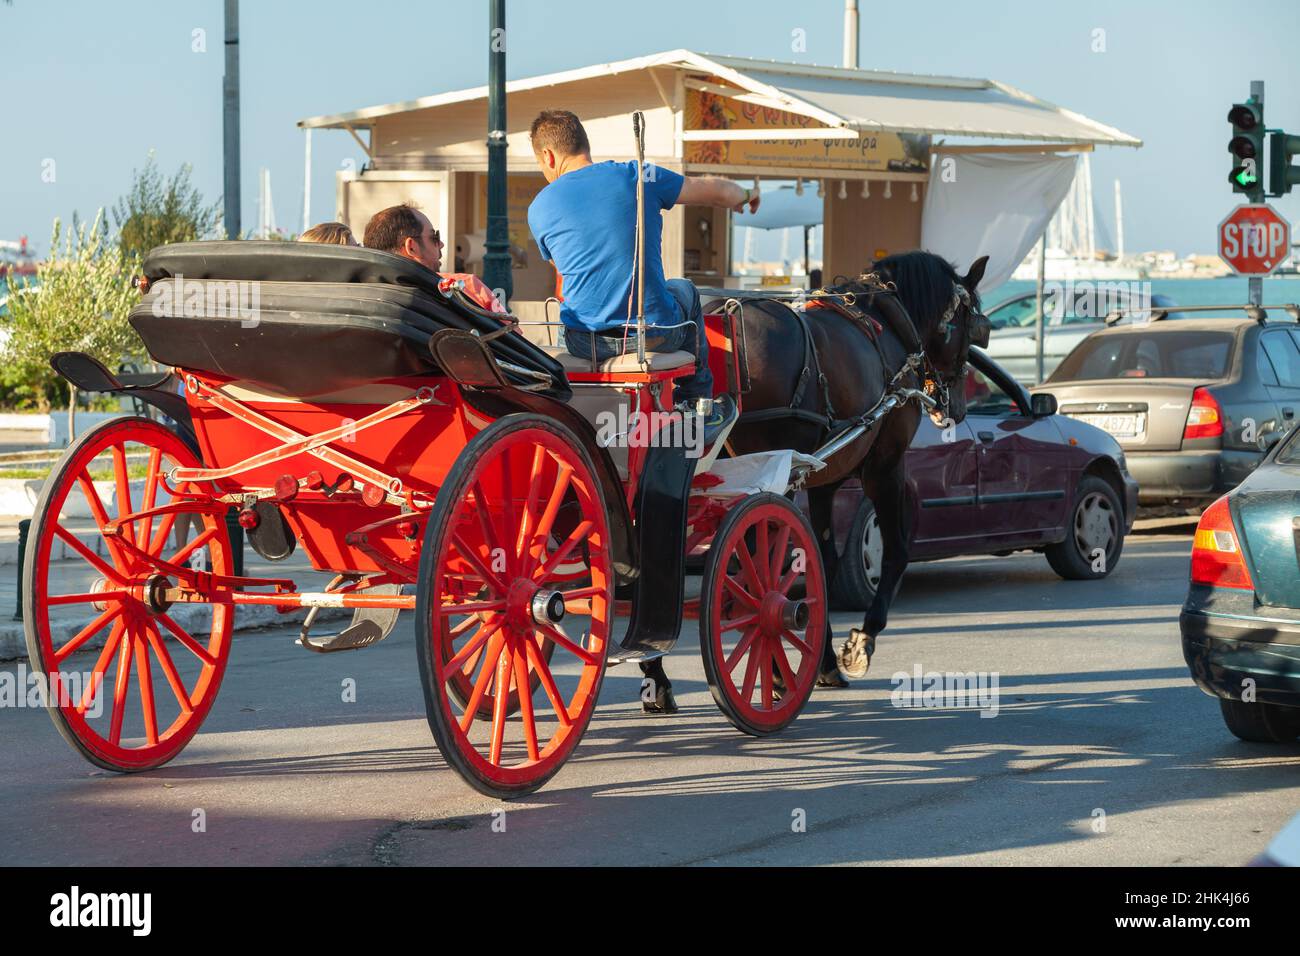 Zakynthos, Greece - August 14, 2016: An open red horse-drawn carriage with tourists and a coachman, rear view Stock Photo